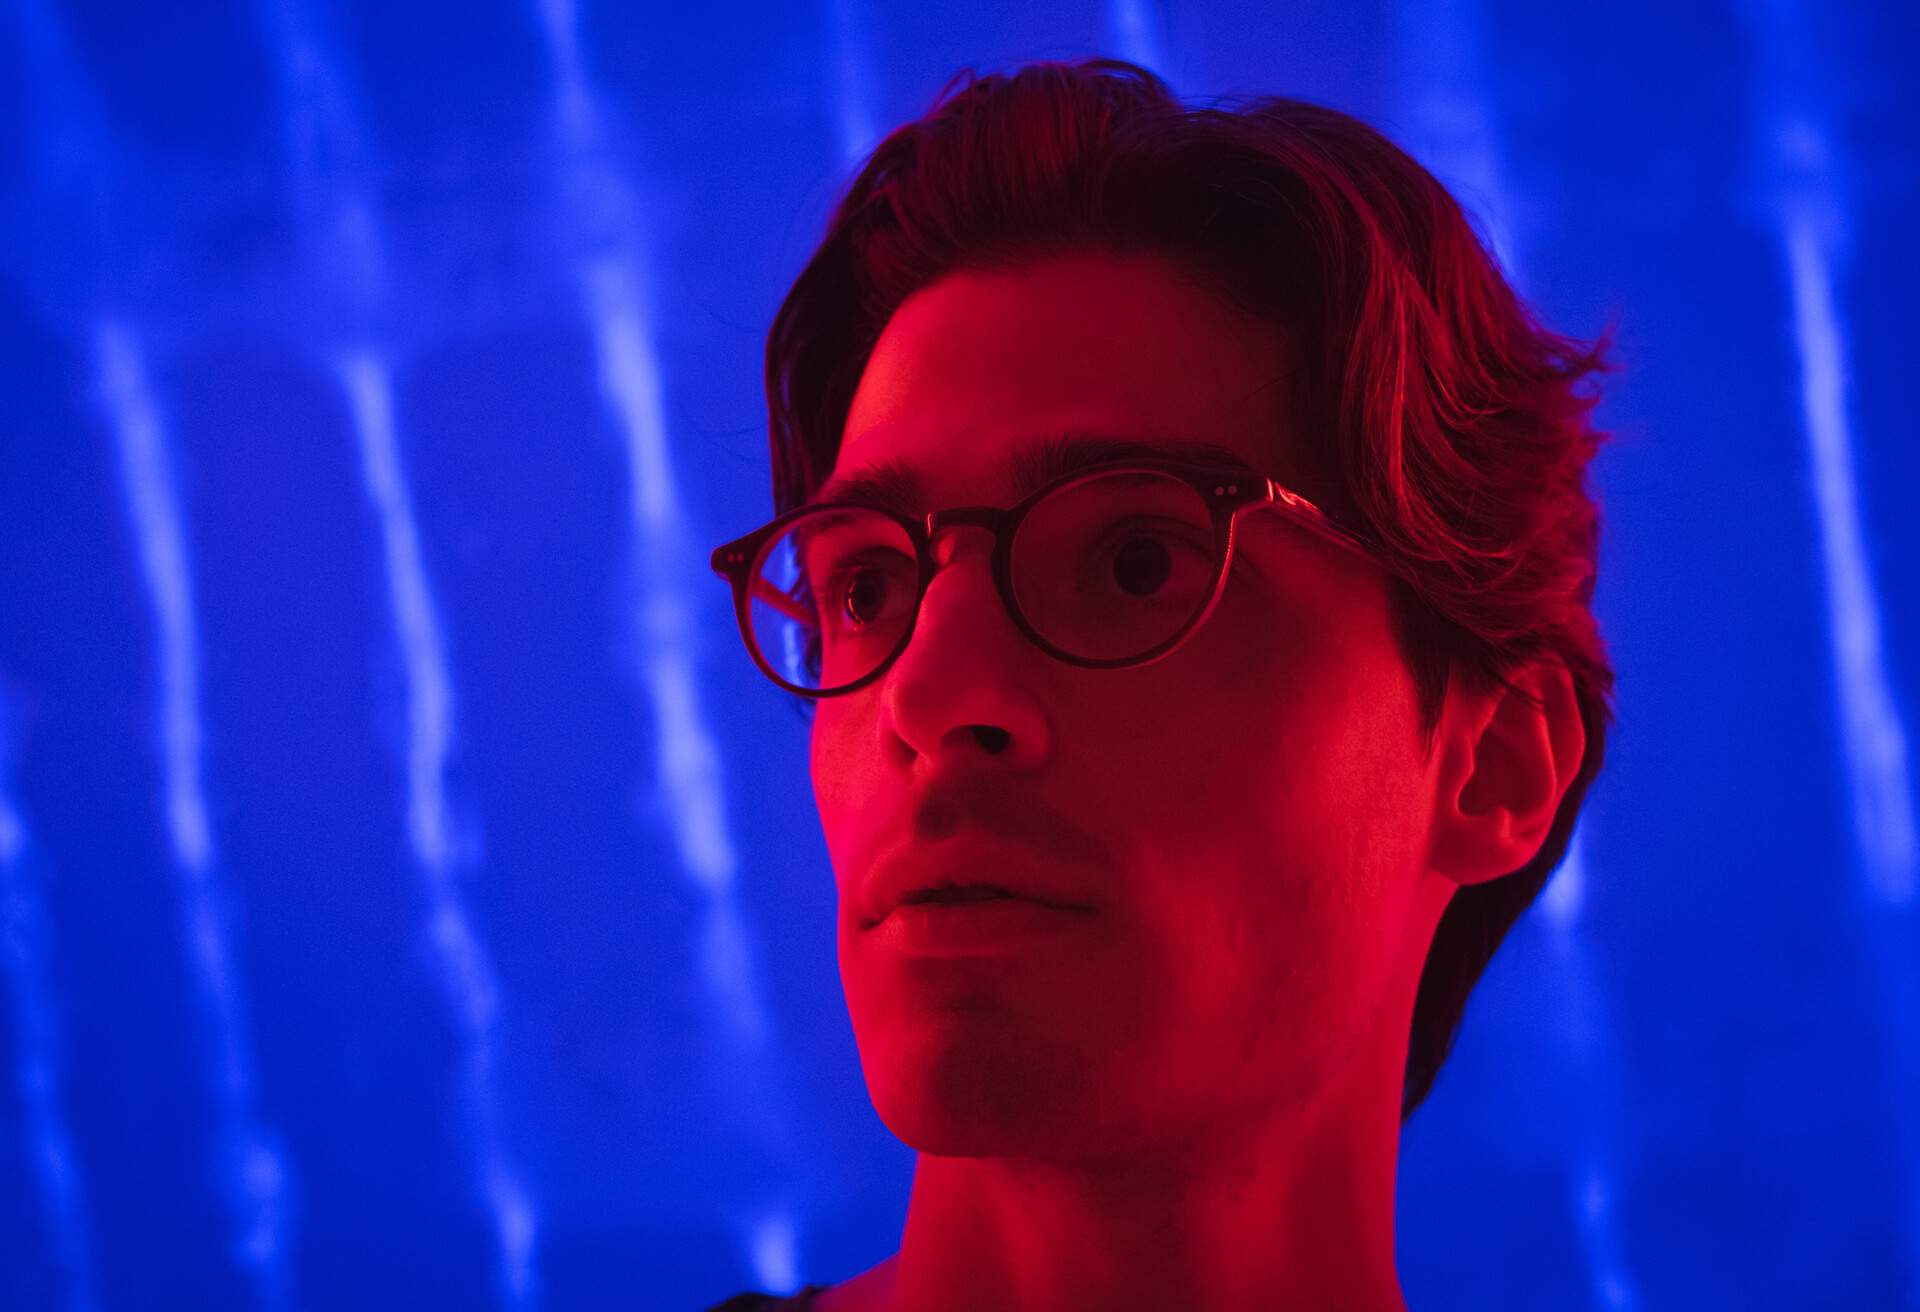 A face of a man in red light with blue background.